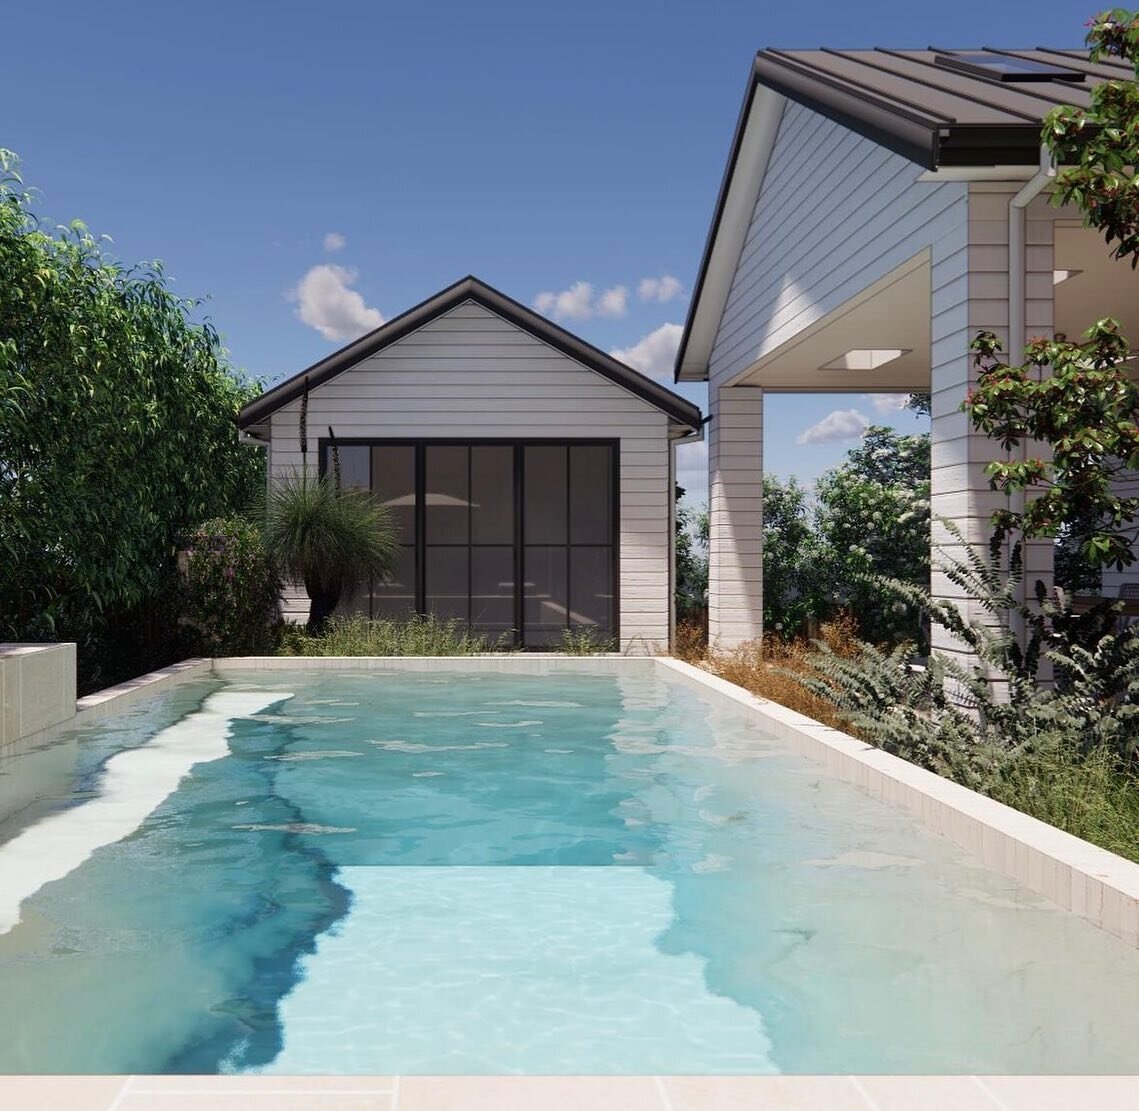 New Pool &amp; Pool house at our custom 515m2 Spilt Level 2 Storey Home coming soon to Mulgoa&hellip; Watch this space for 2024 😍 🏡 🌳 ☀️ 
Landscaping @ paul.alexander.landscape 

▪️6Bedrooms &amp; 5Bathrooms
▪️Open Plan Family / Dining / Kitchen 
